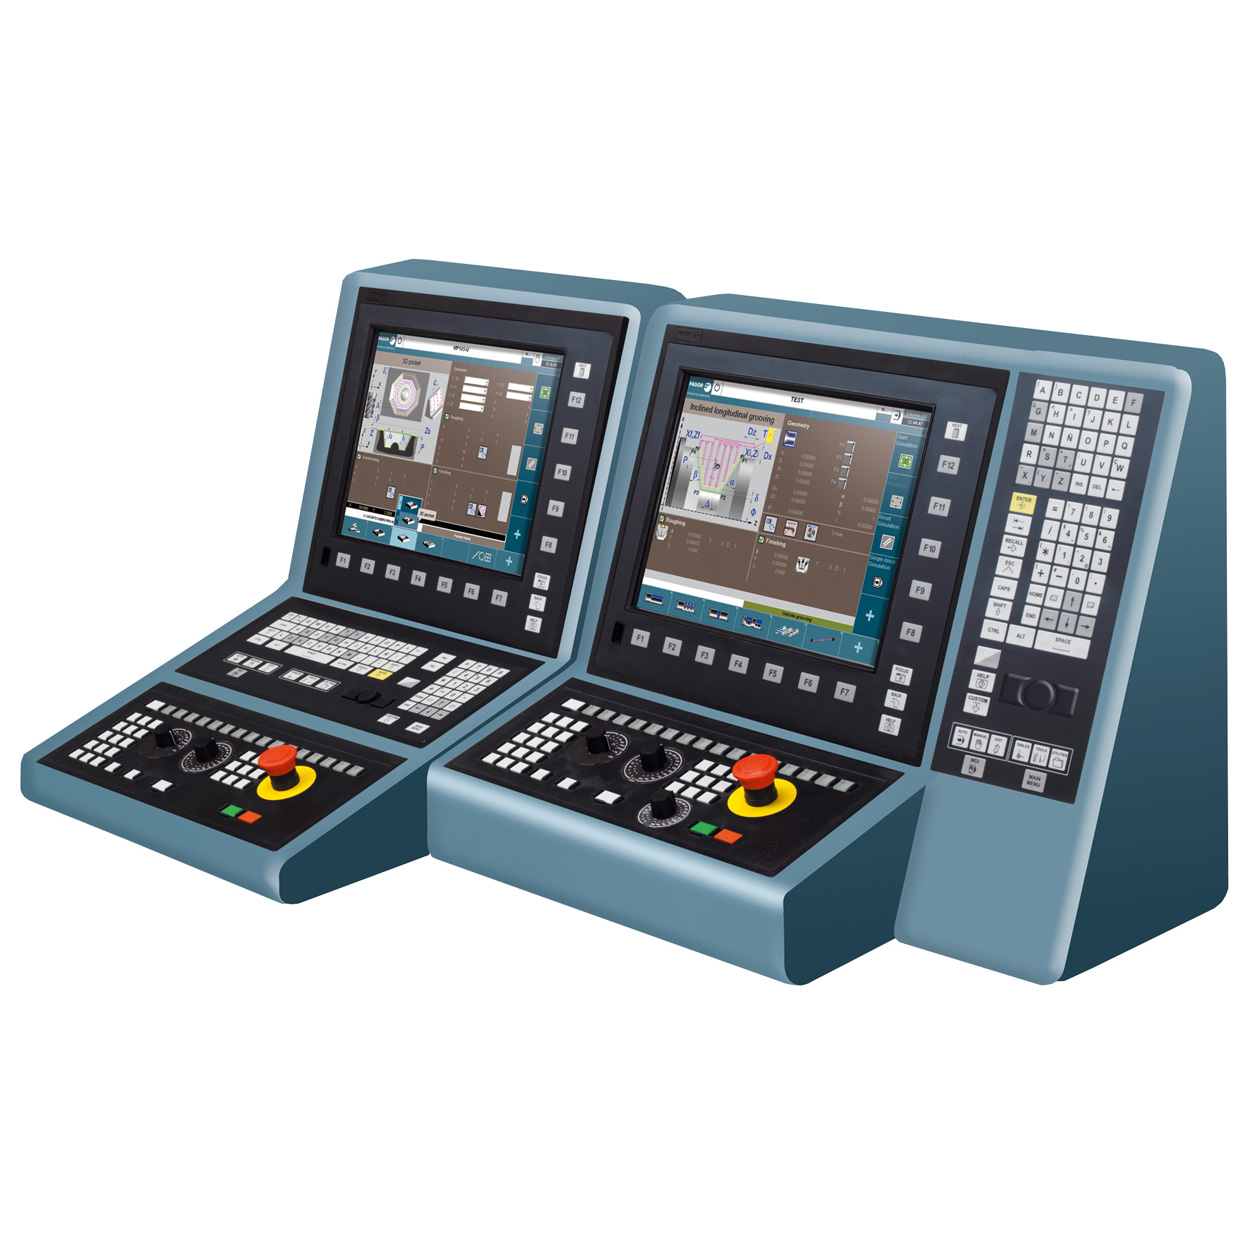 CNC 8070 for other applications